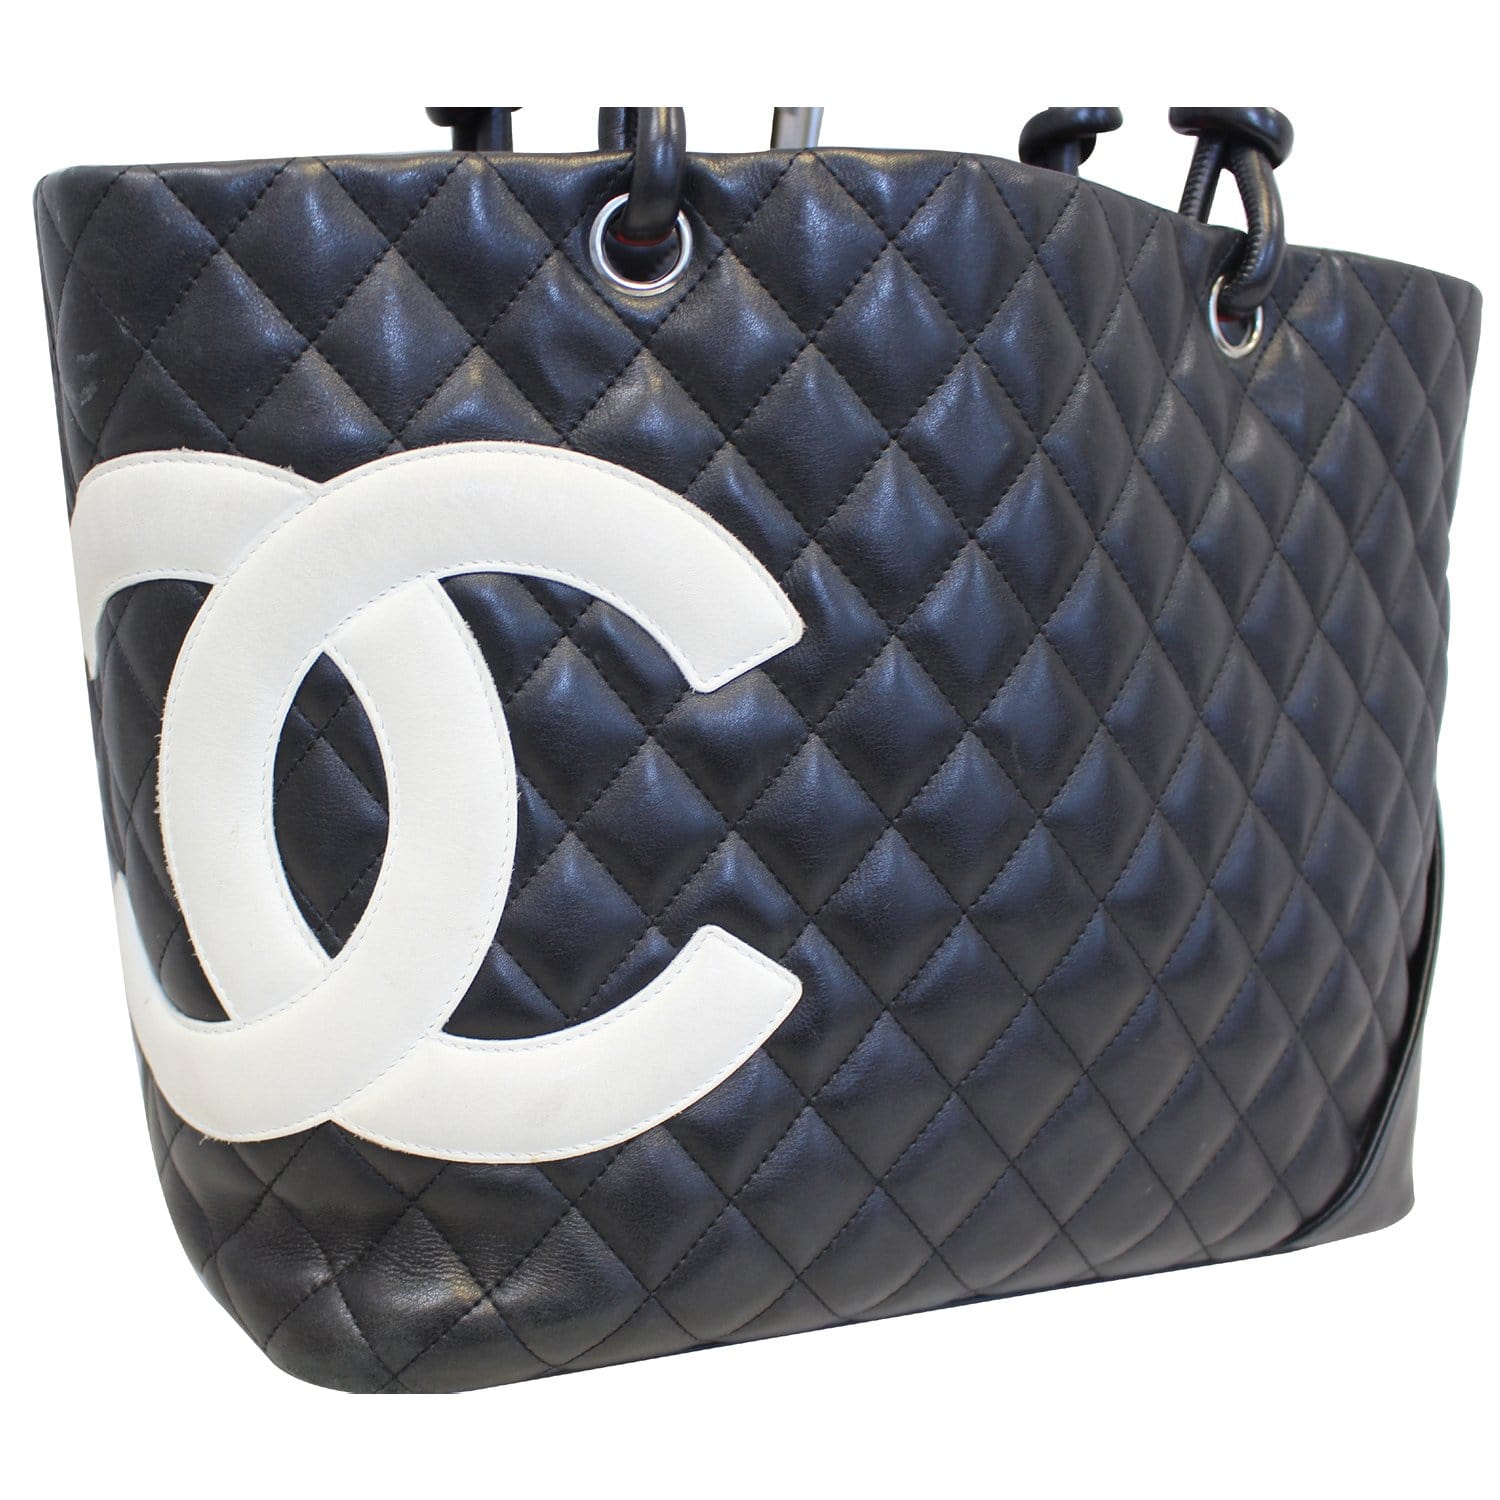 leather bag chanel